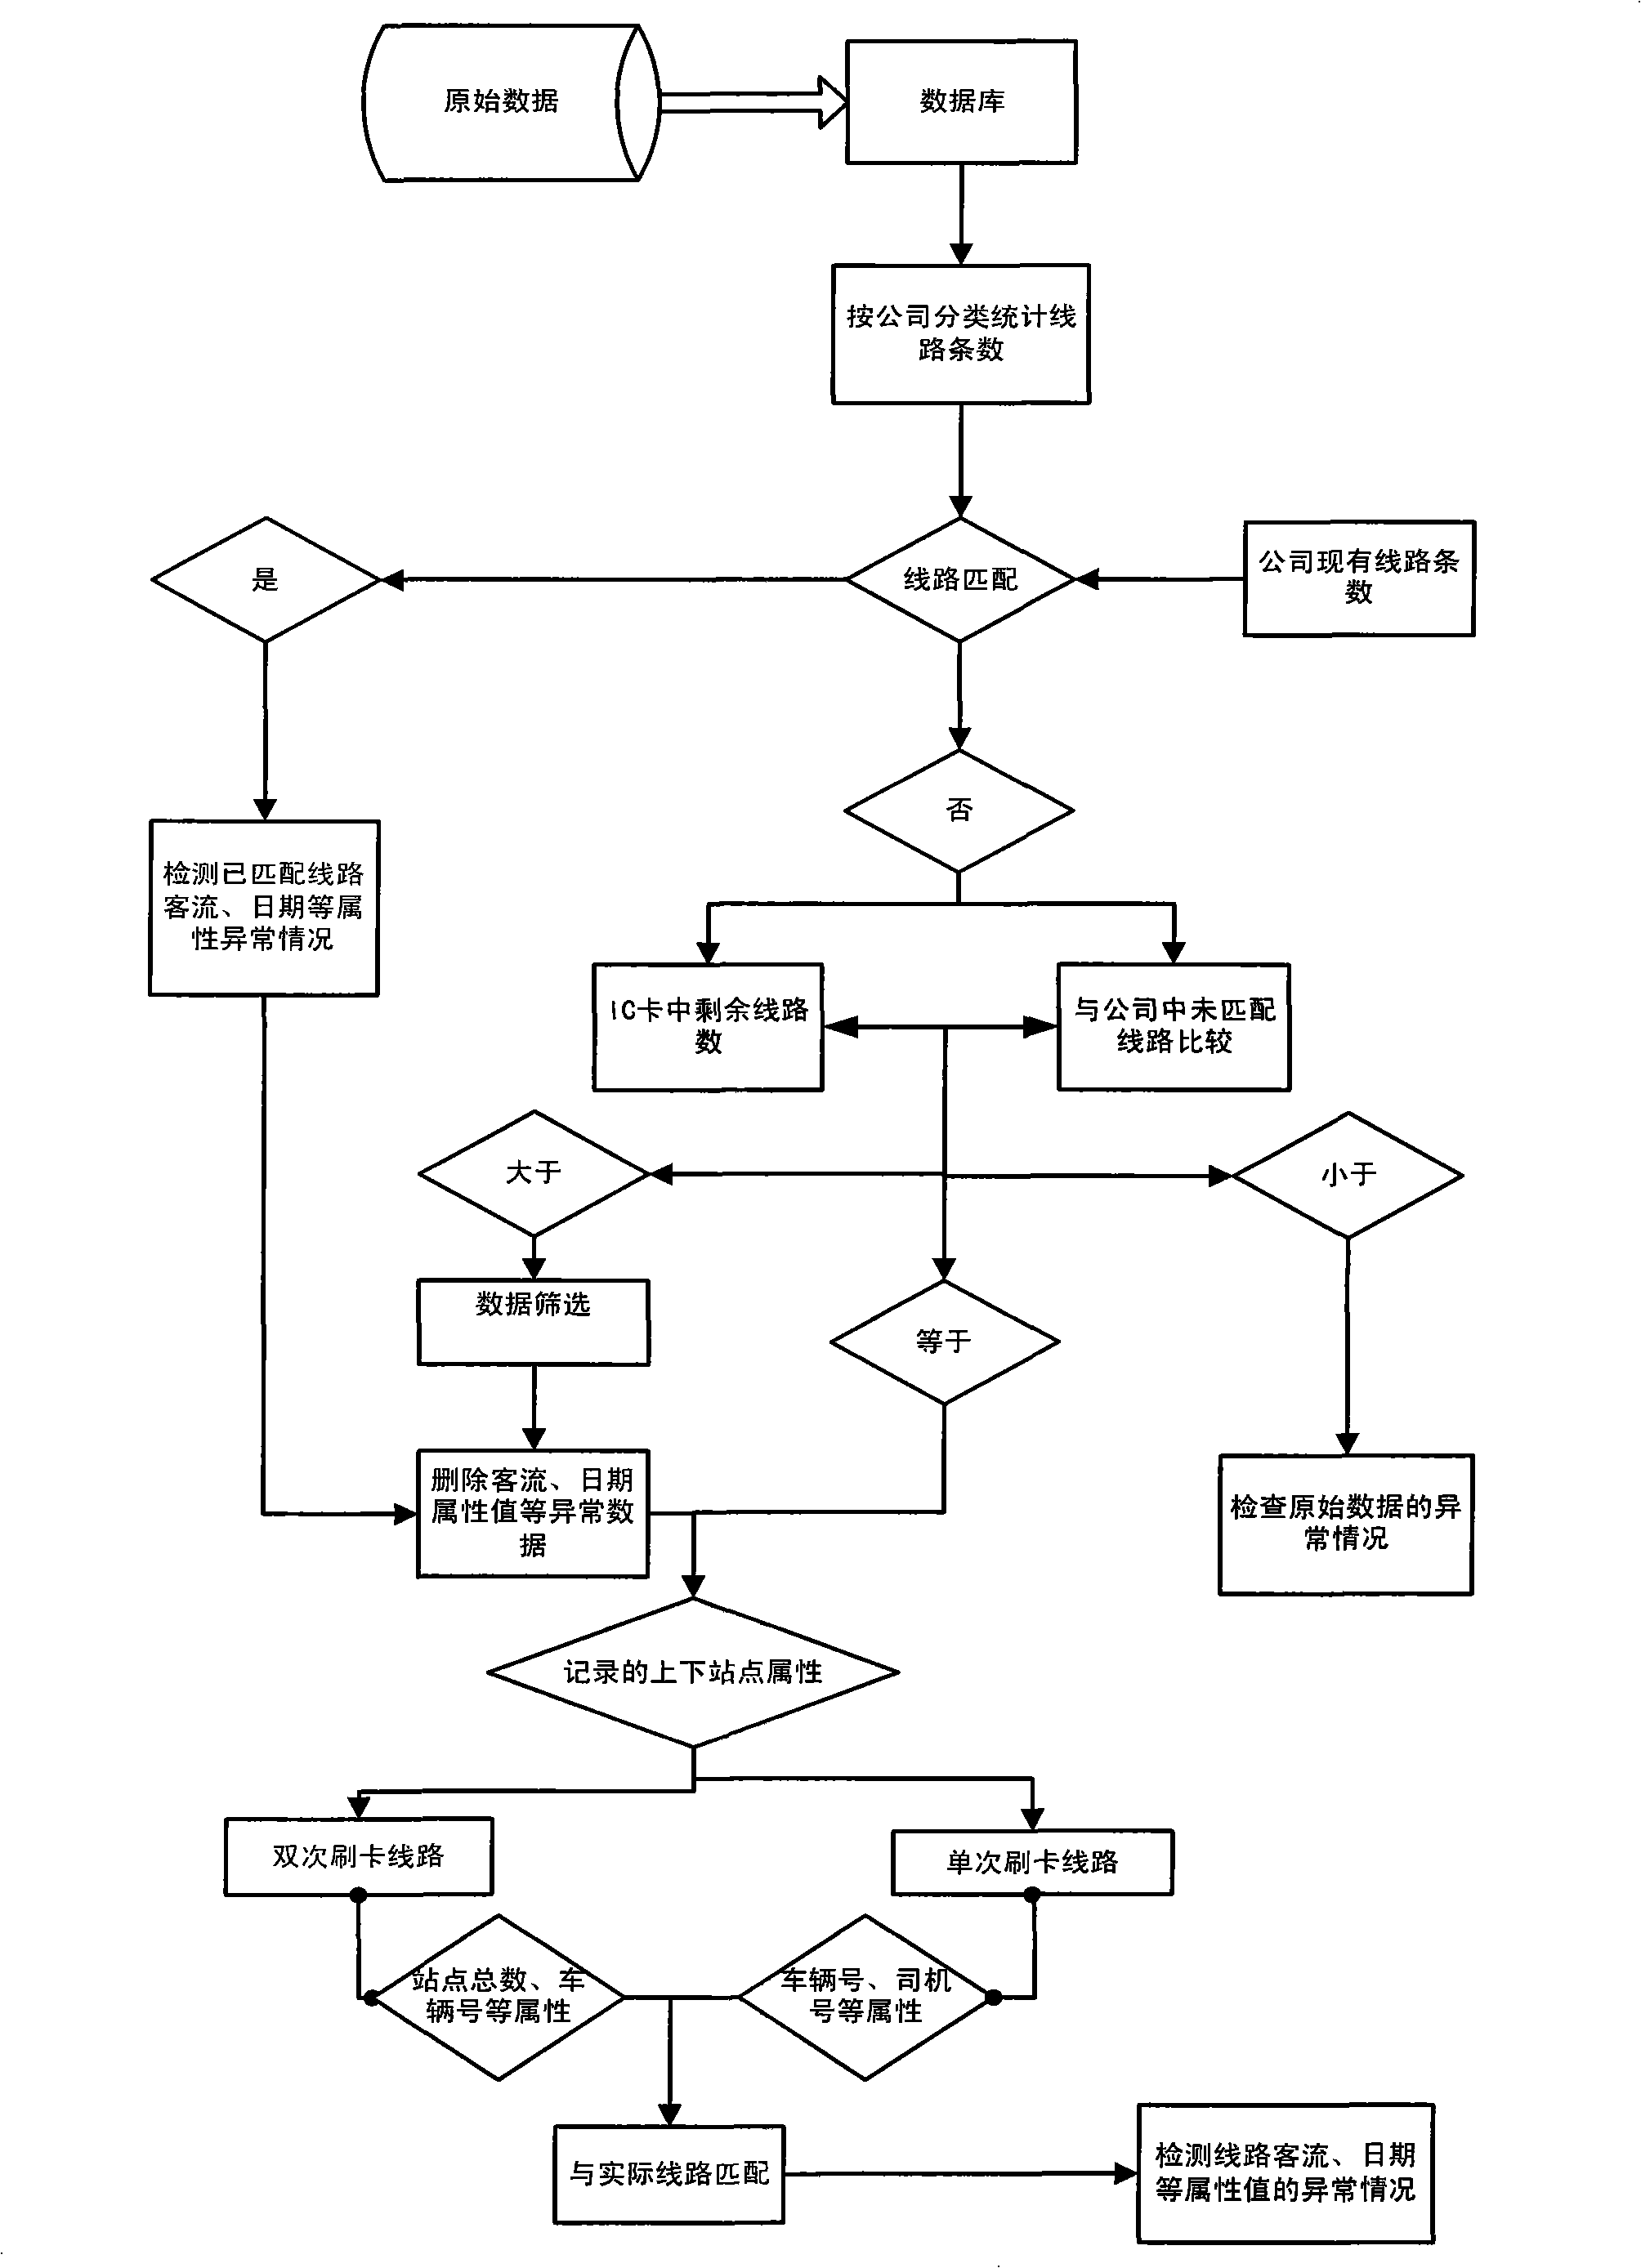 Matching method based on public transport IC card lines